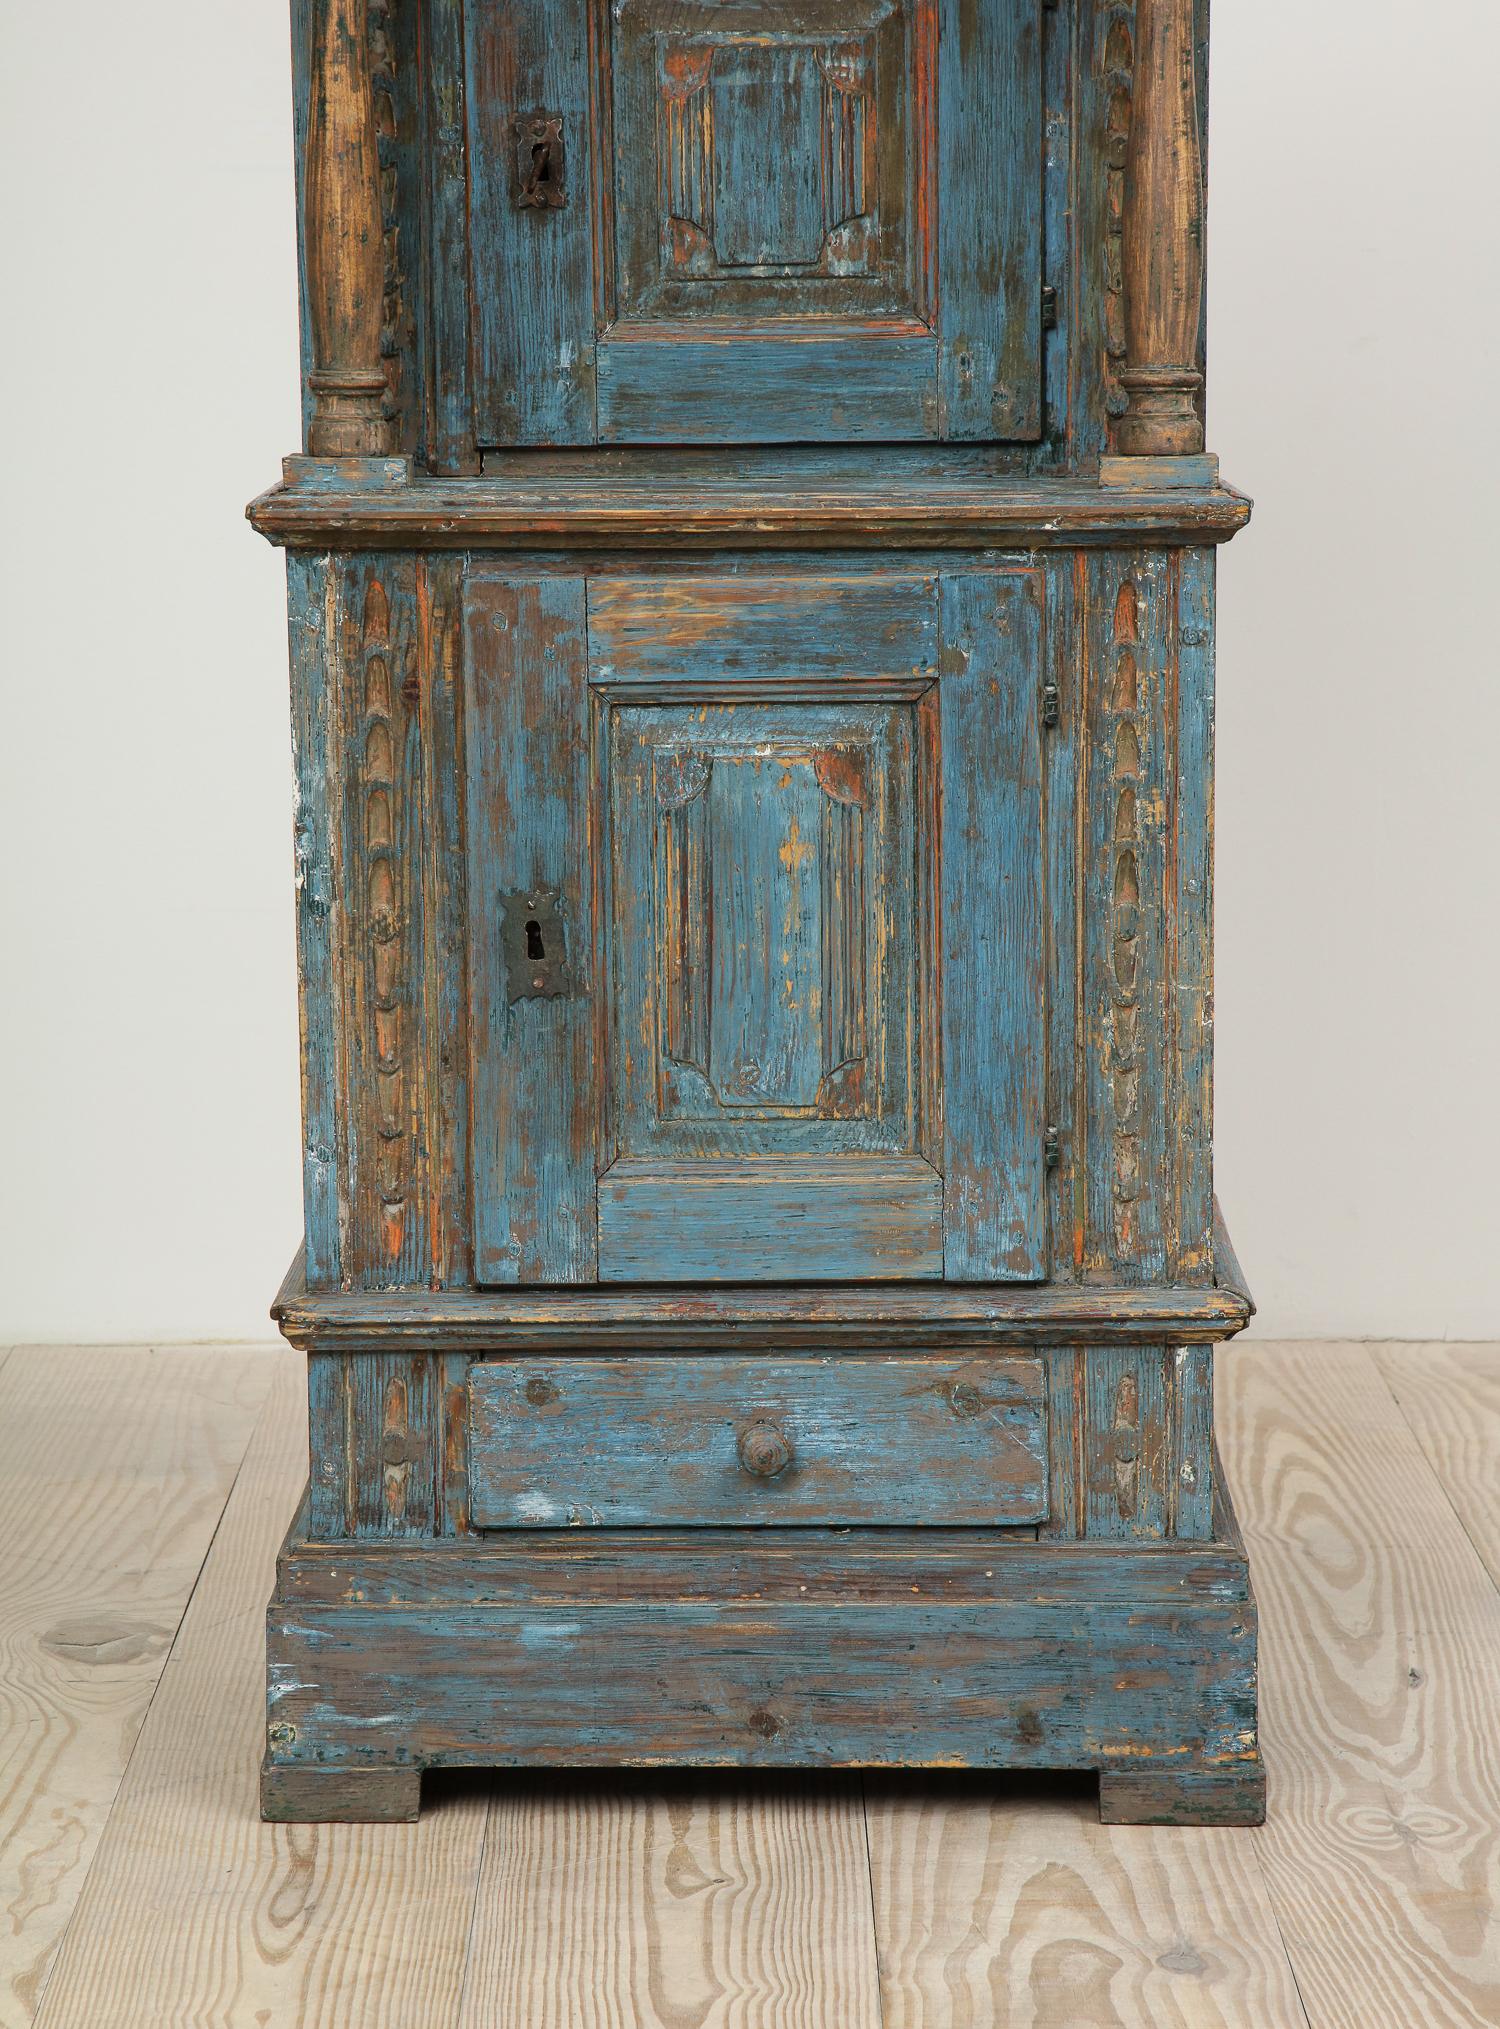 Wood Renaissance-Revival Danish Cabinet in Blue Paint with Red Interior, ca. 1750